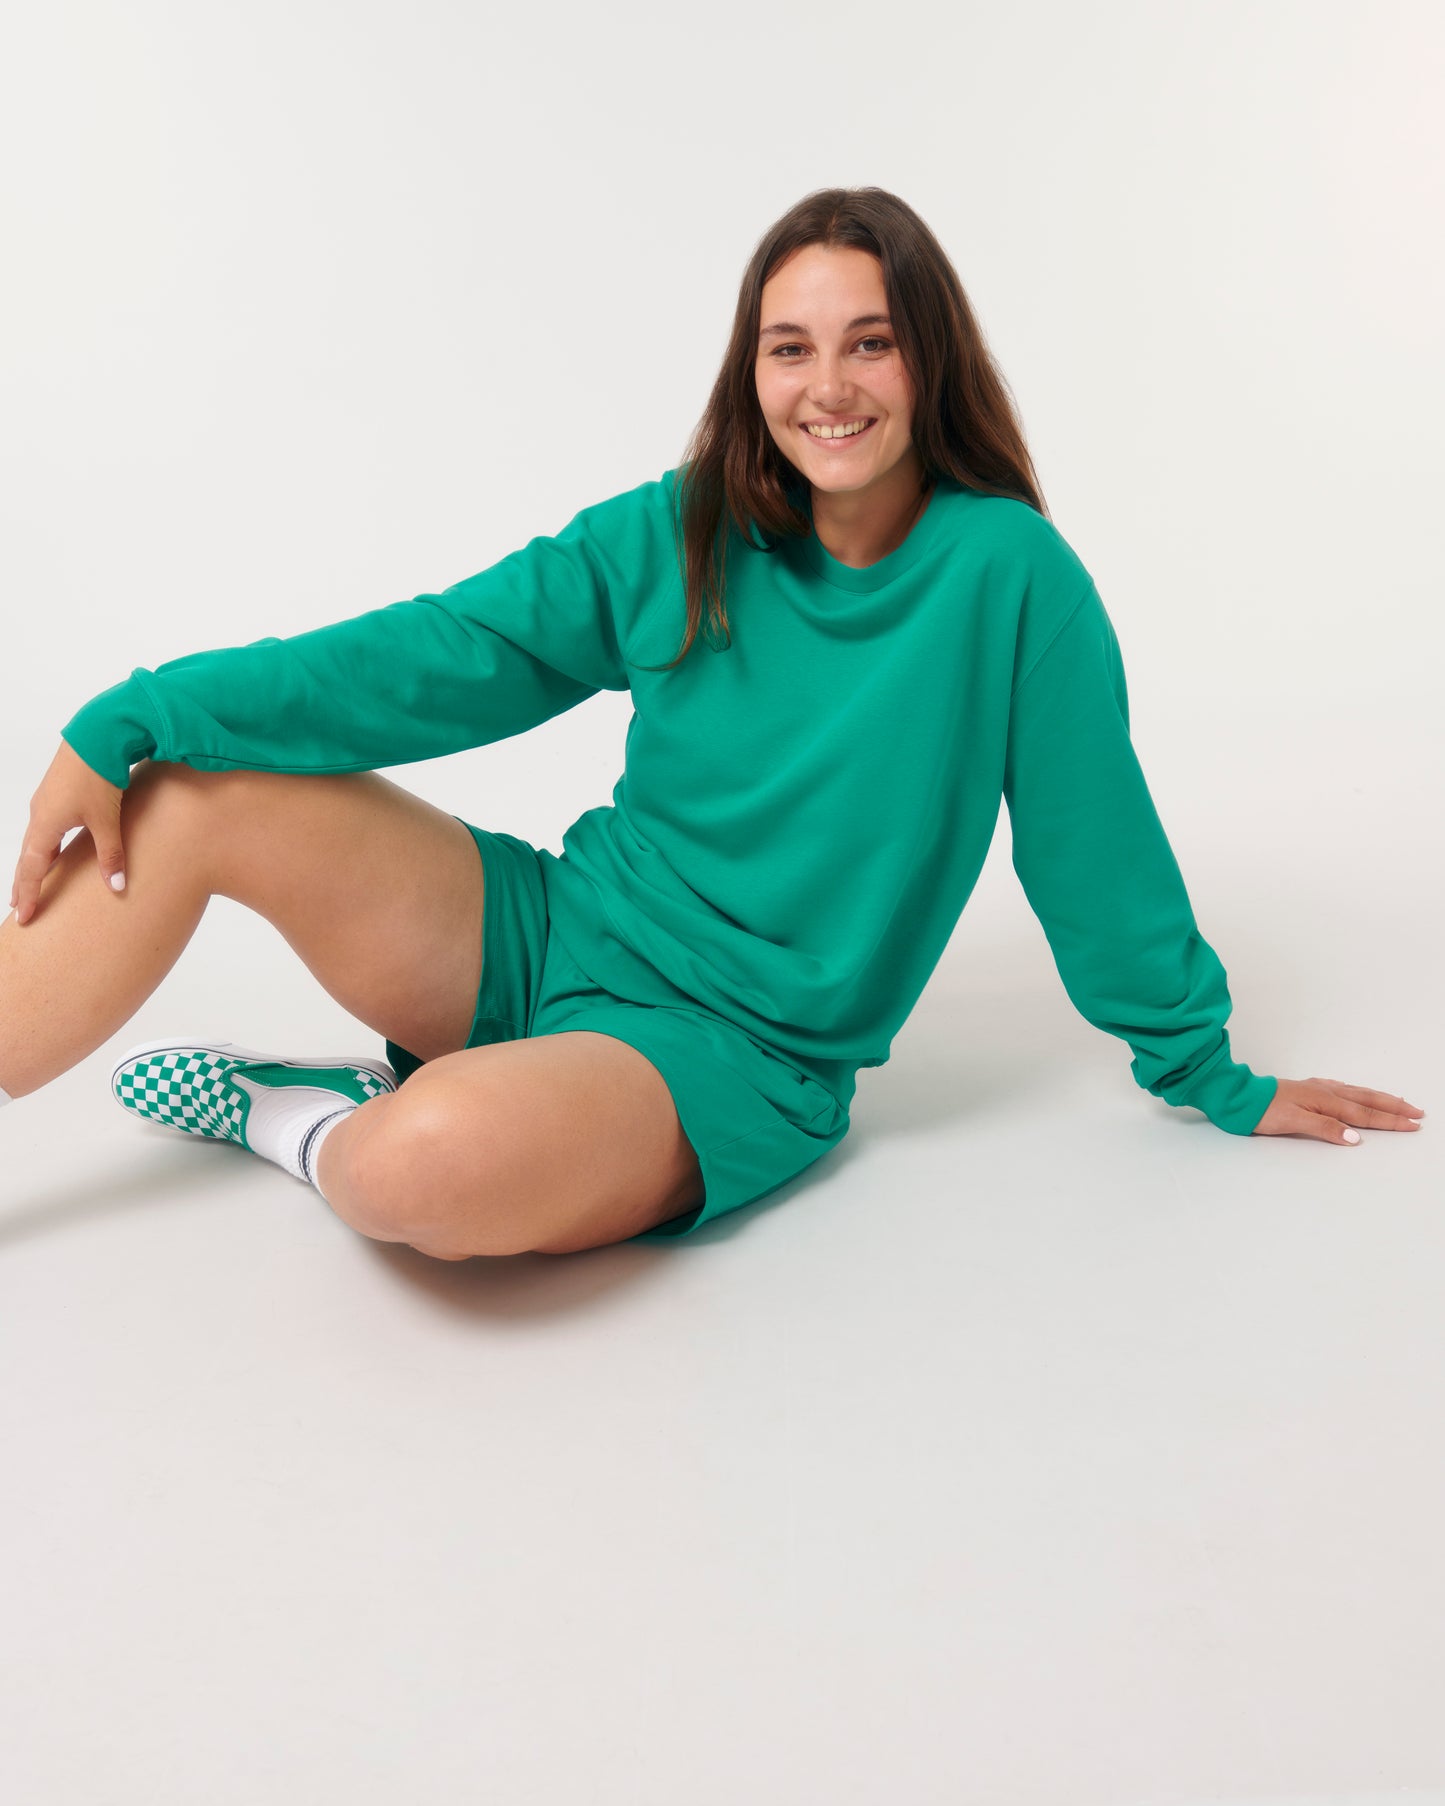 It Fits Dropper - Unisex Regular Fit Sweater - Terry voering